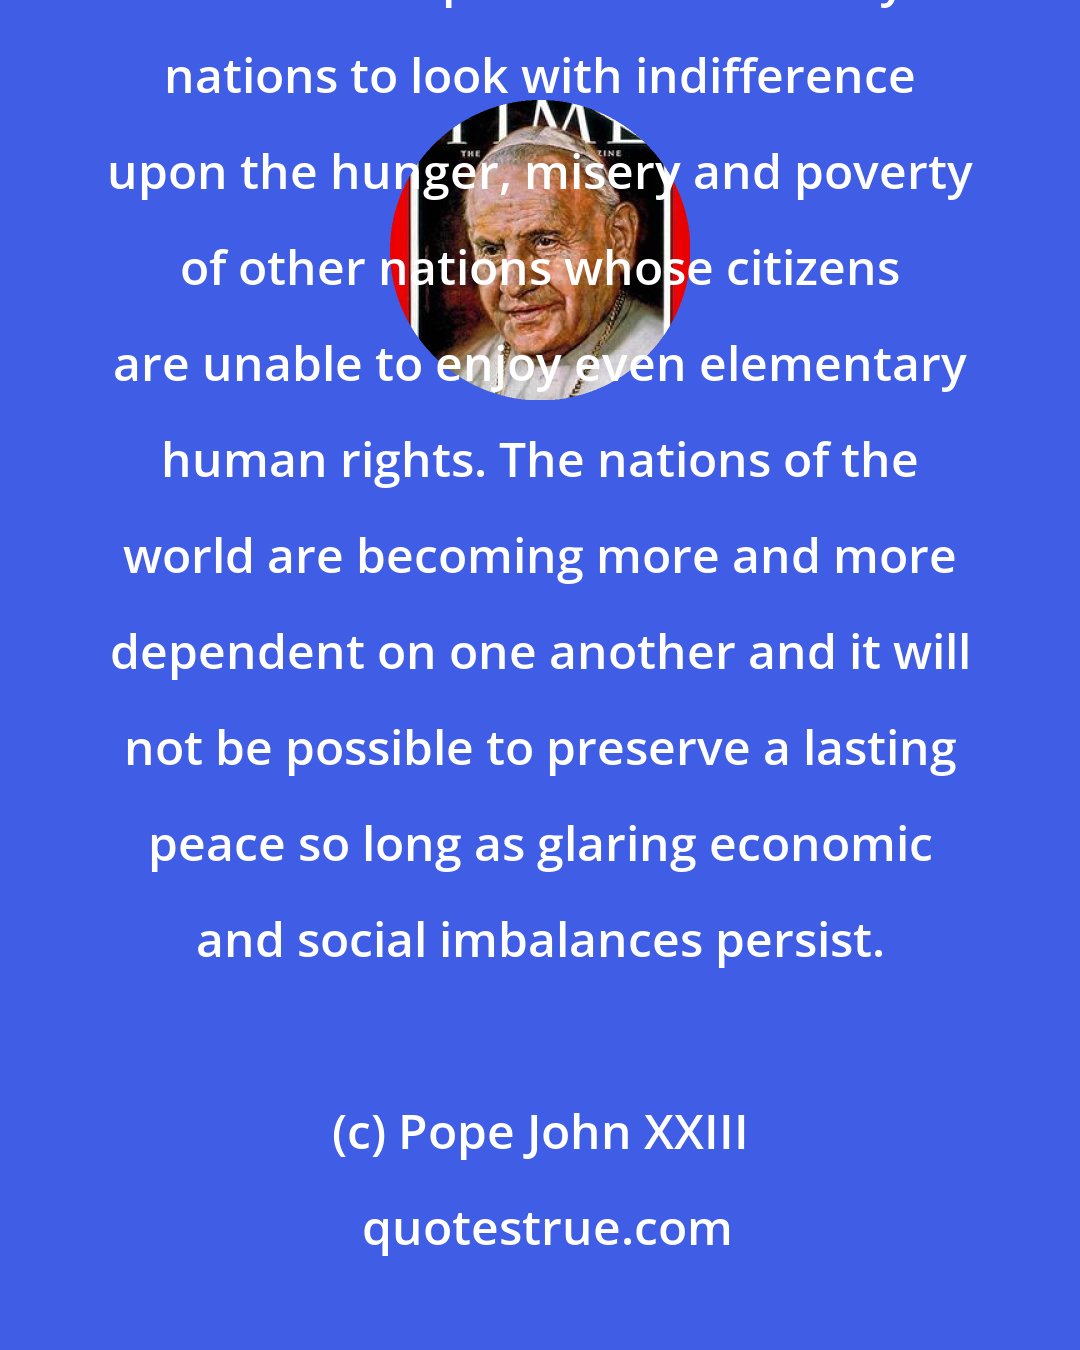 Pope John XXIII: The solidarity which binds all men together as members of a common family makes it impossible for wealthy nations to look with indifference upon the hunger, misery and poverty of other nations whose citizens are unable to enjoy even elementary human rights. The nations of the world are becoming more and more dependent on one another and it will not be possible to preserve a lasting peace so long as glaring economic and social imbalances persist.